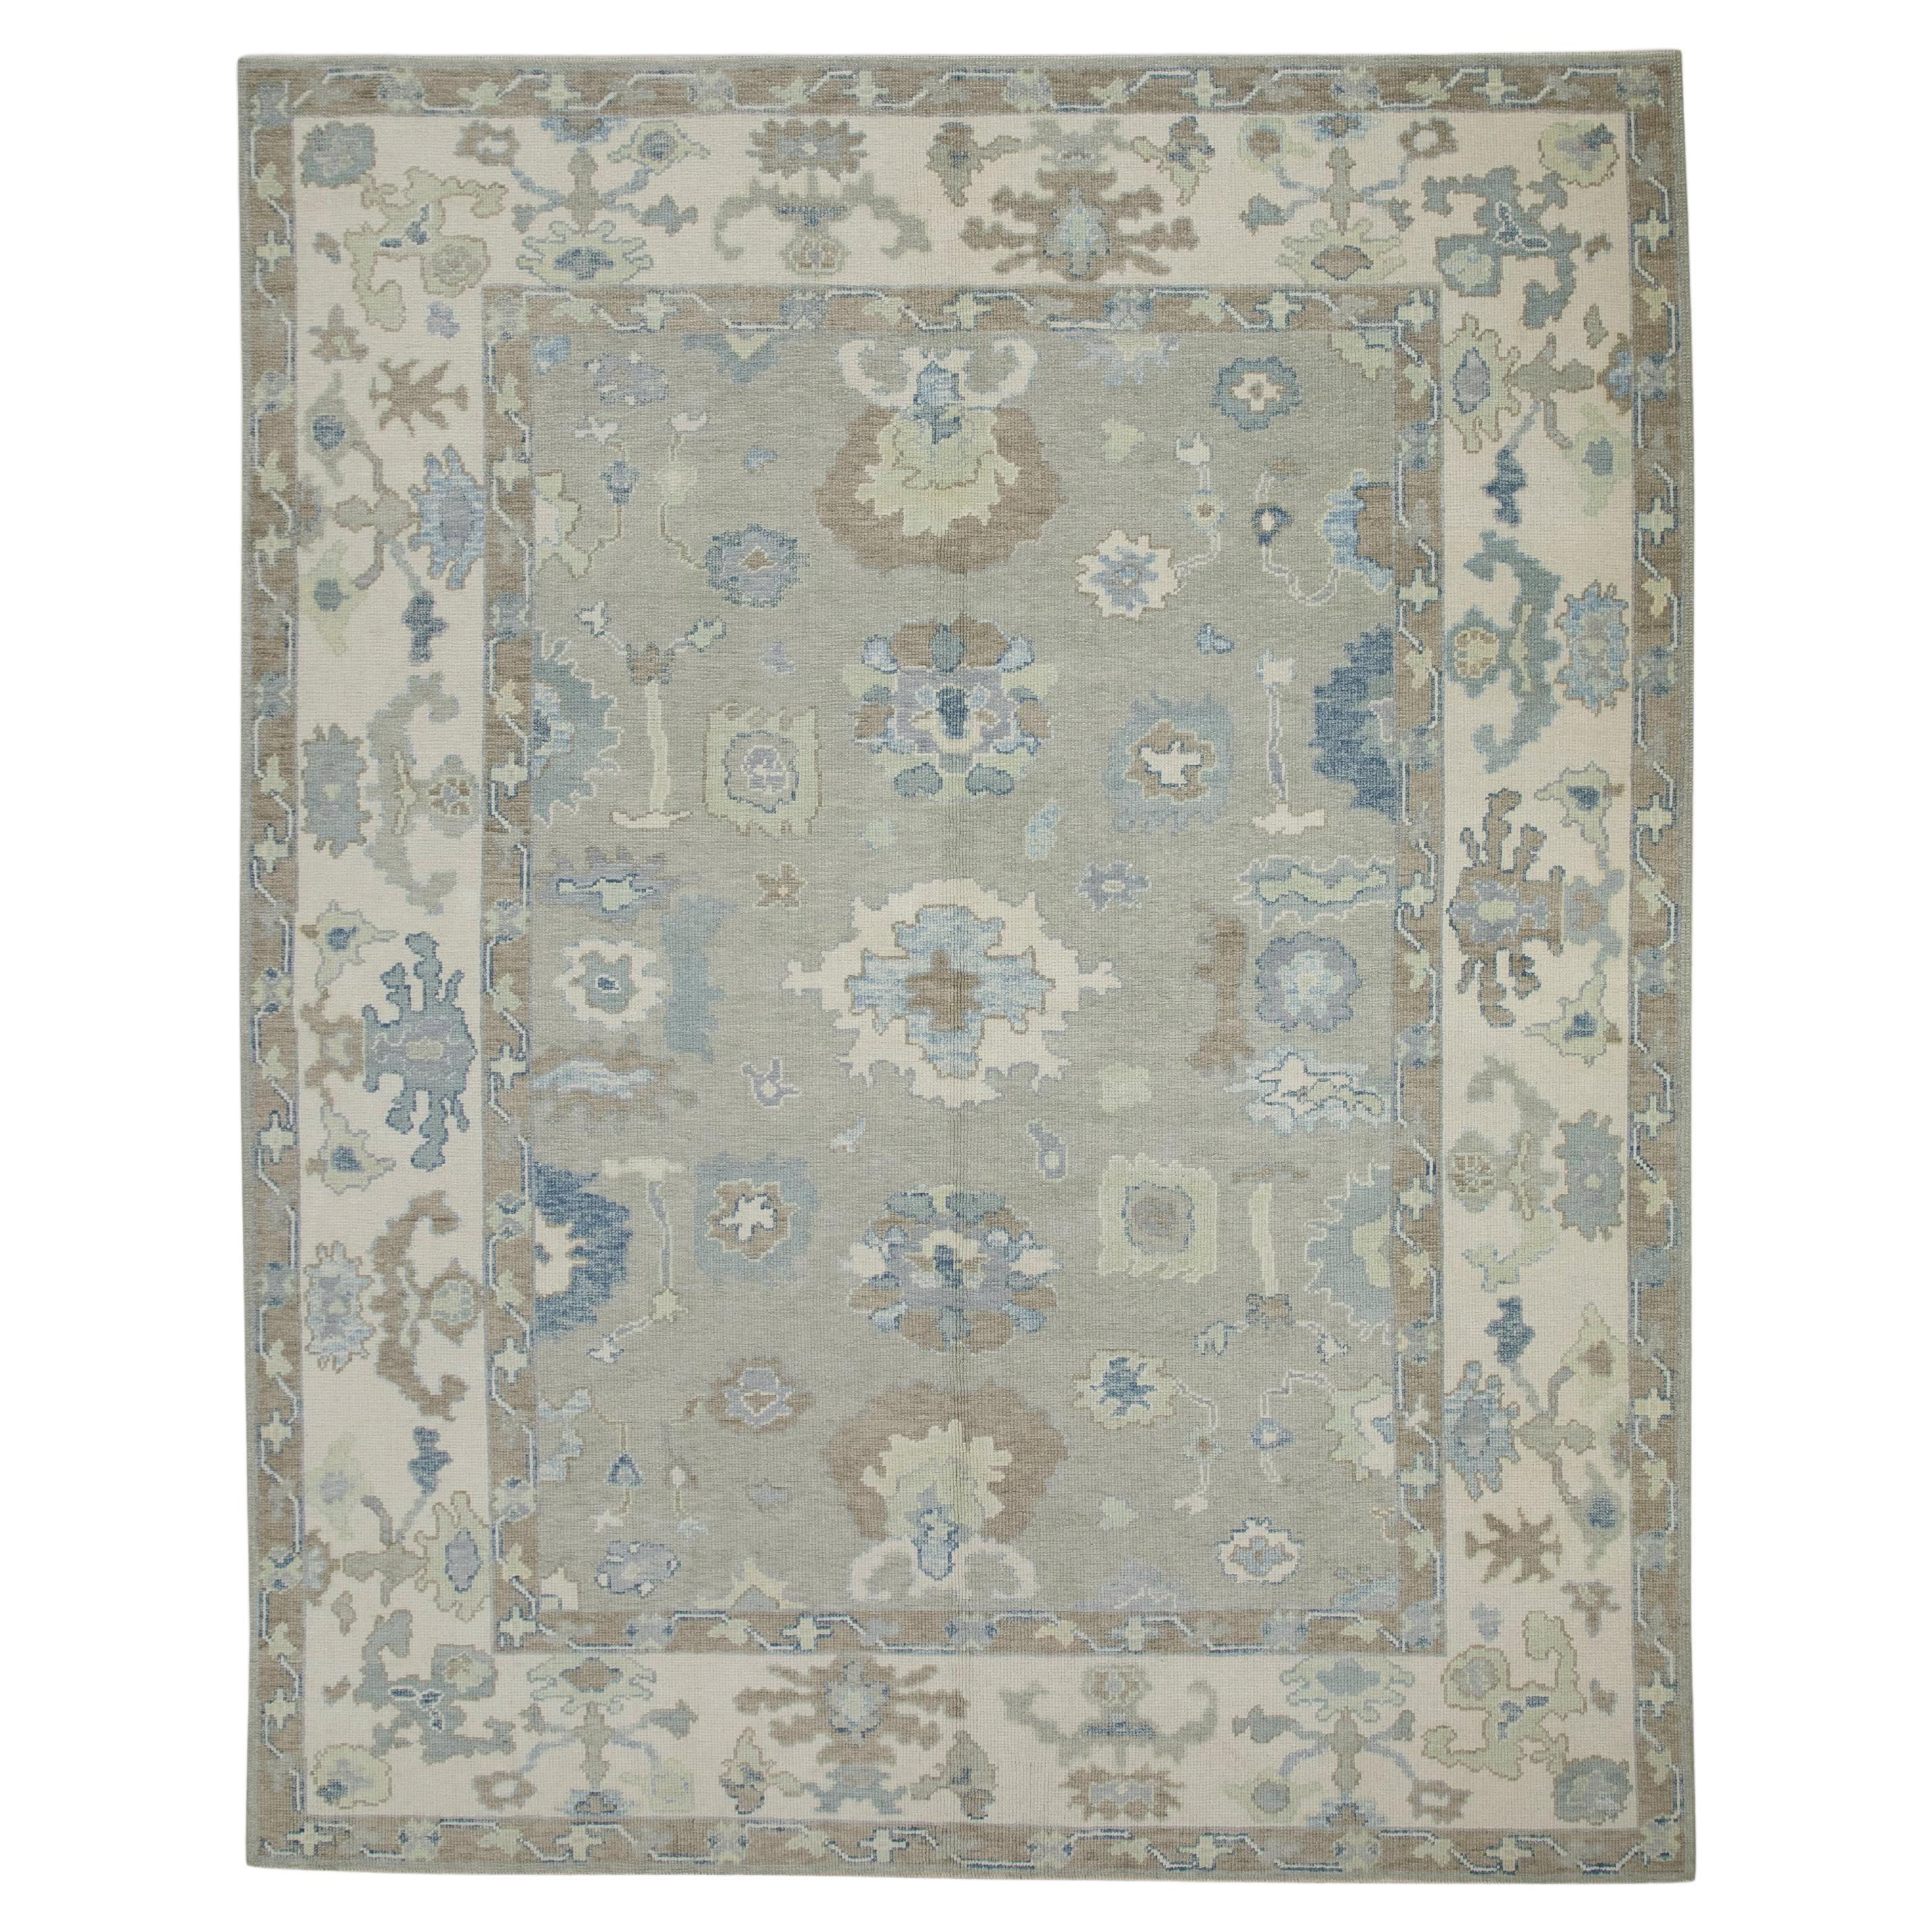 Gray & Brown Floral Design Handwoven Wool Turkish Oushak Rug 8' x 9'6" For Sale